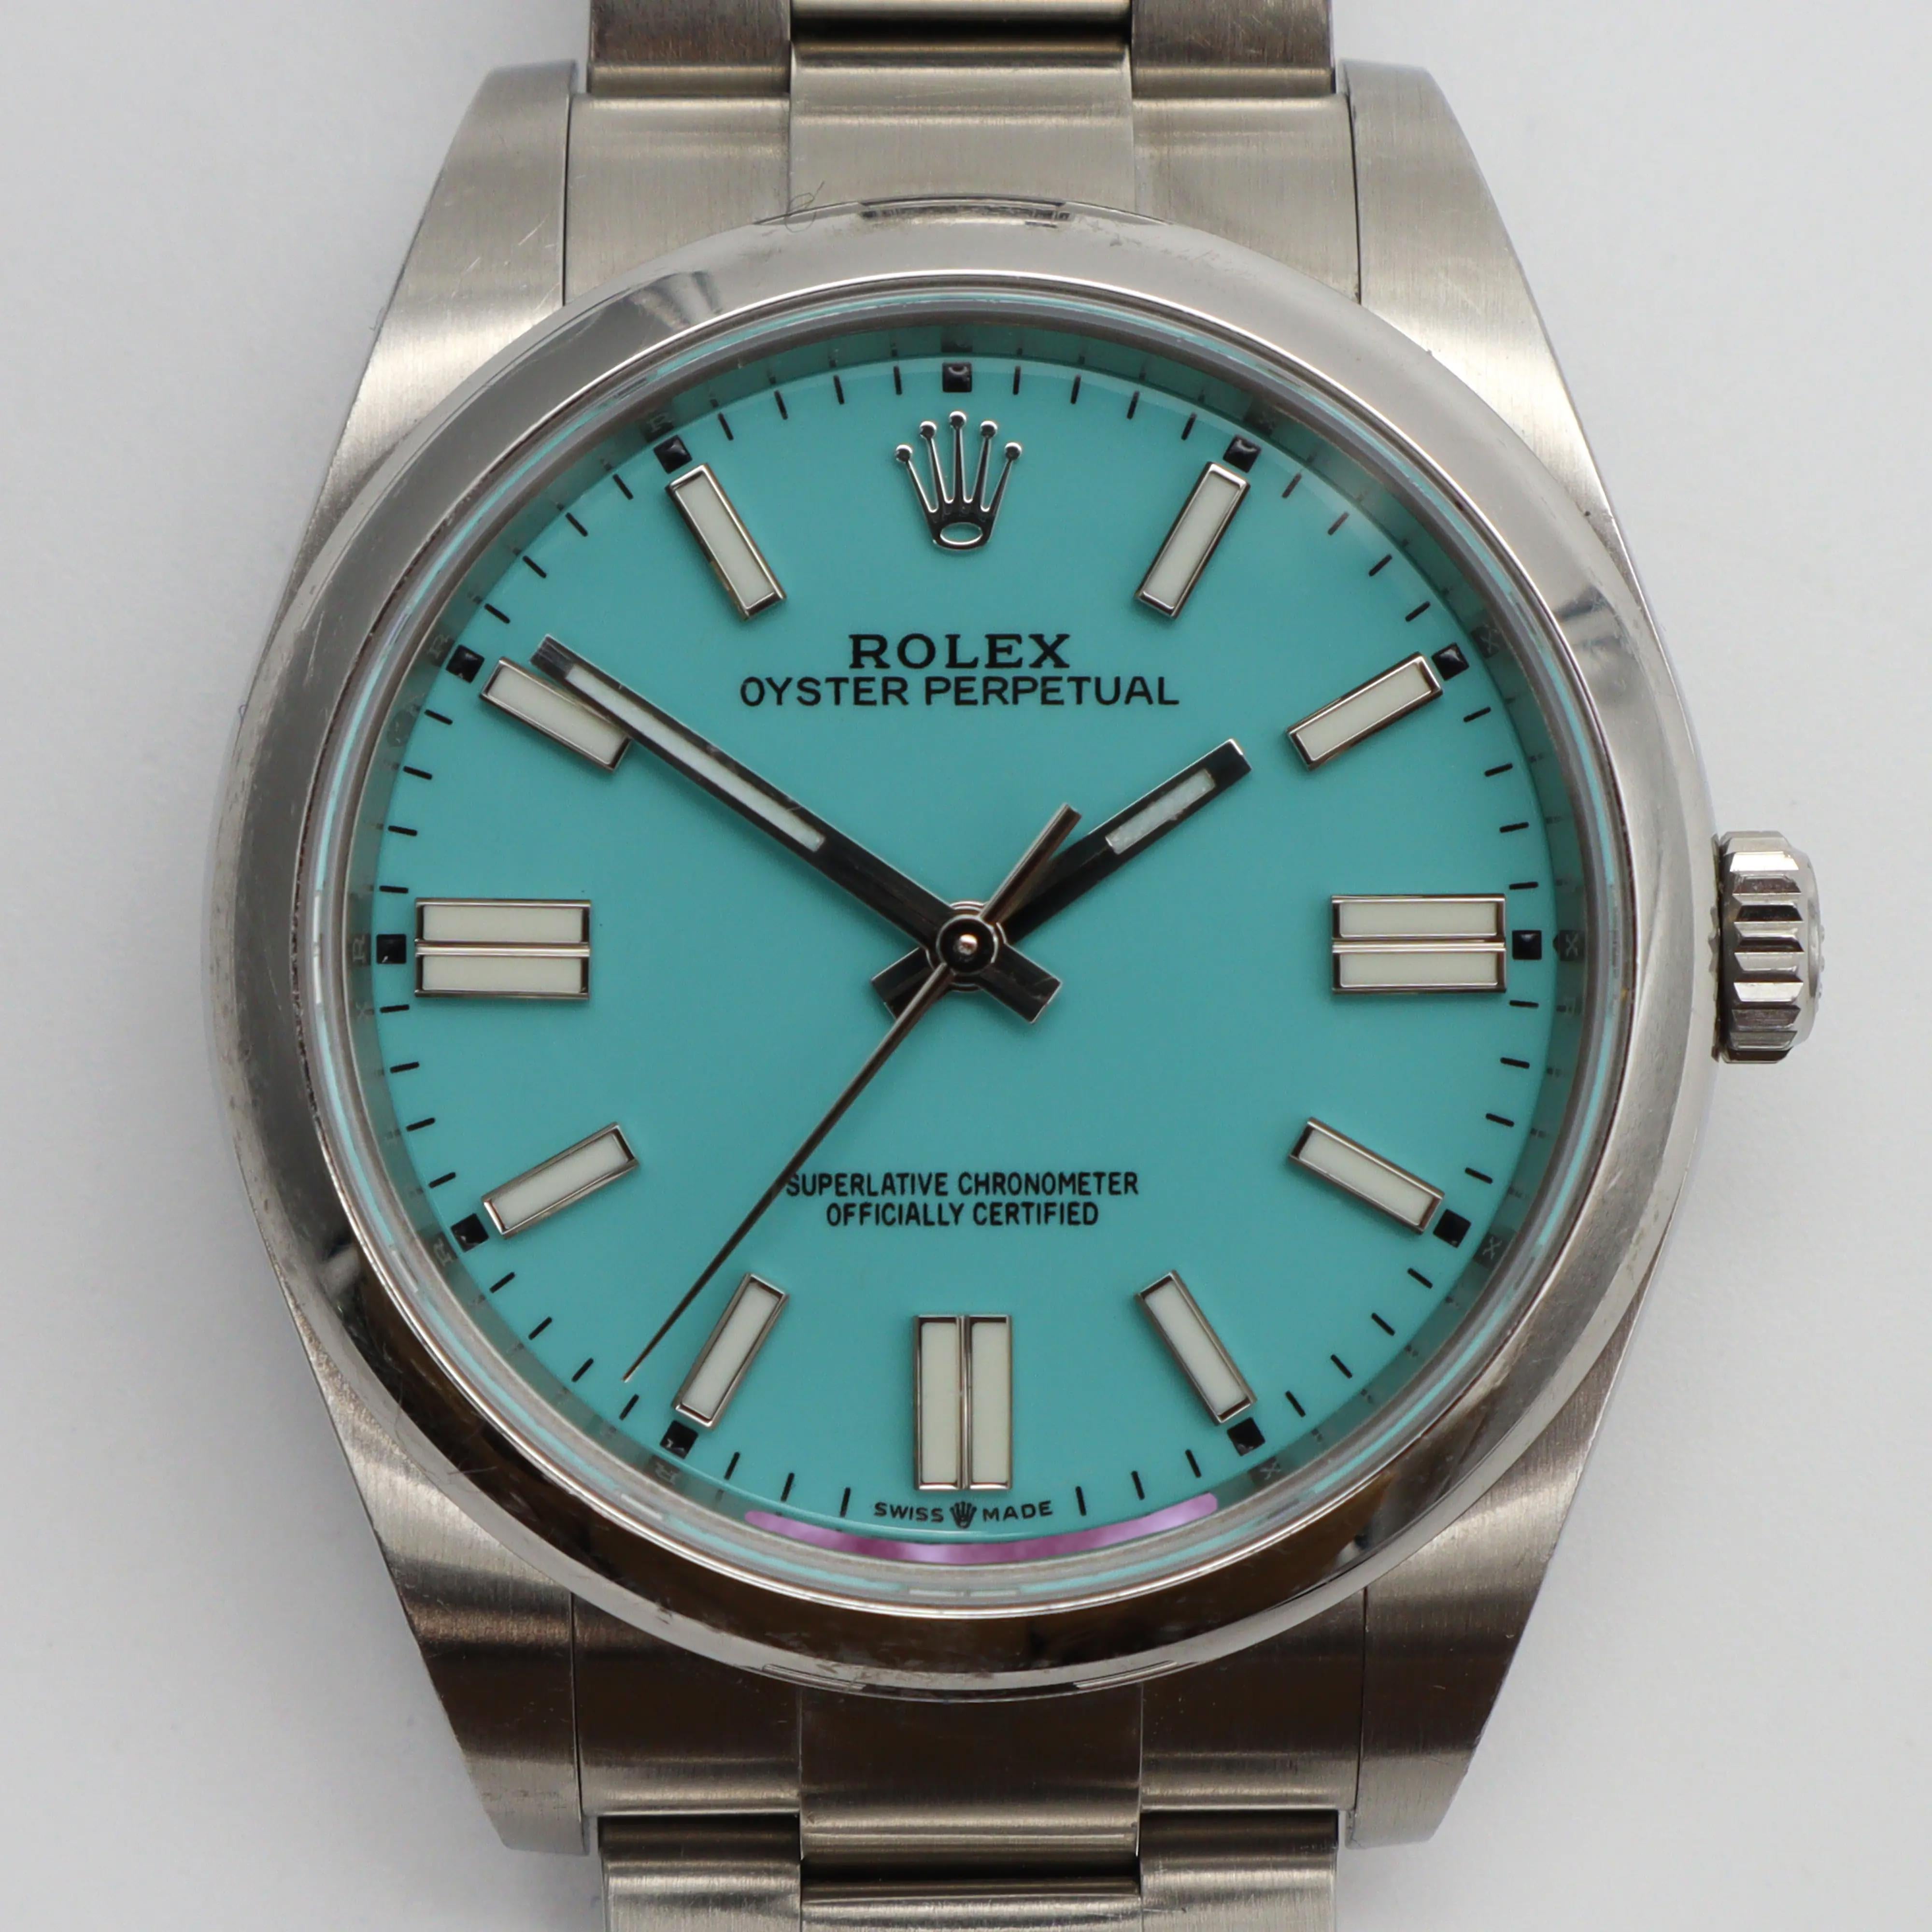 Pre-owned. Comes with an original box and paper. Custom Aftermarket Turquoise Dial


Brand & Model
Brand: Rolex
Model: Oyster Perpetual 116000
General Characteristics

Type: Wristwatch
Department: Men
Style: Luxury
Vintage: No
Customized: